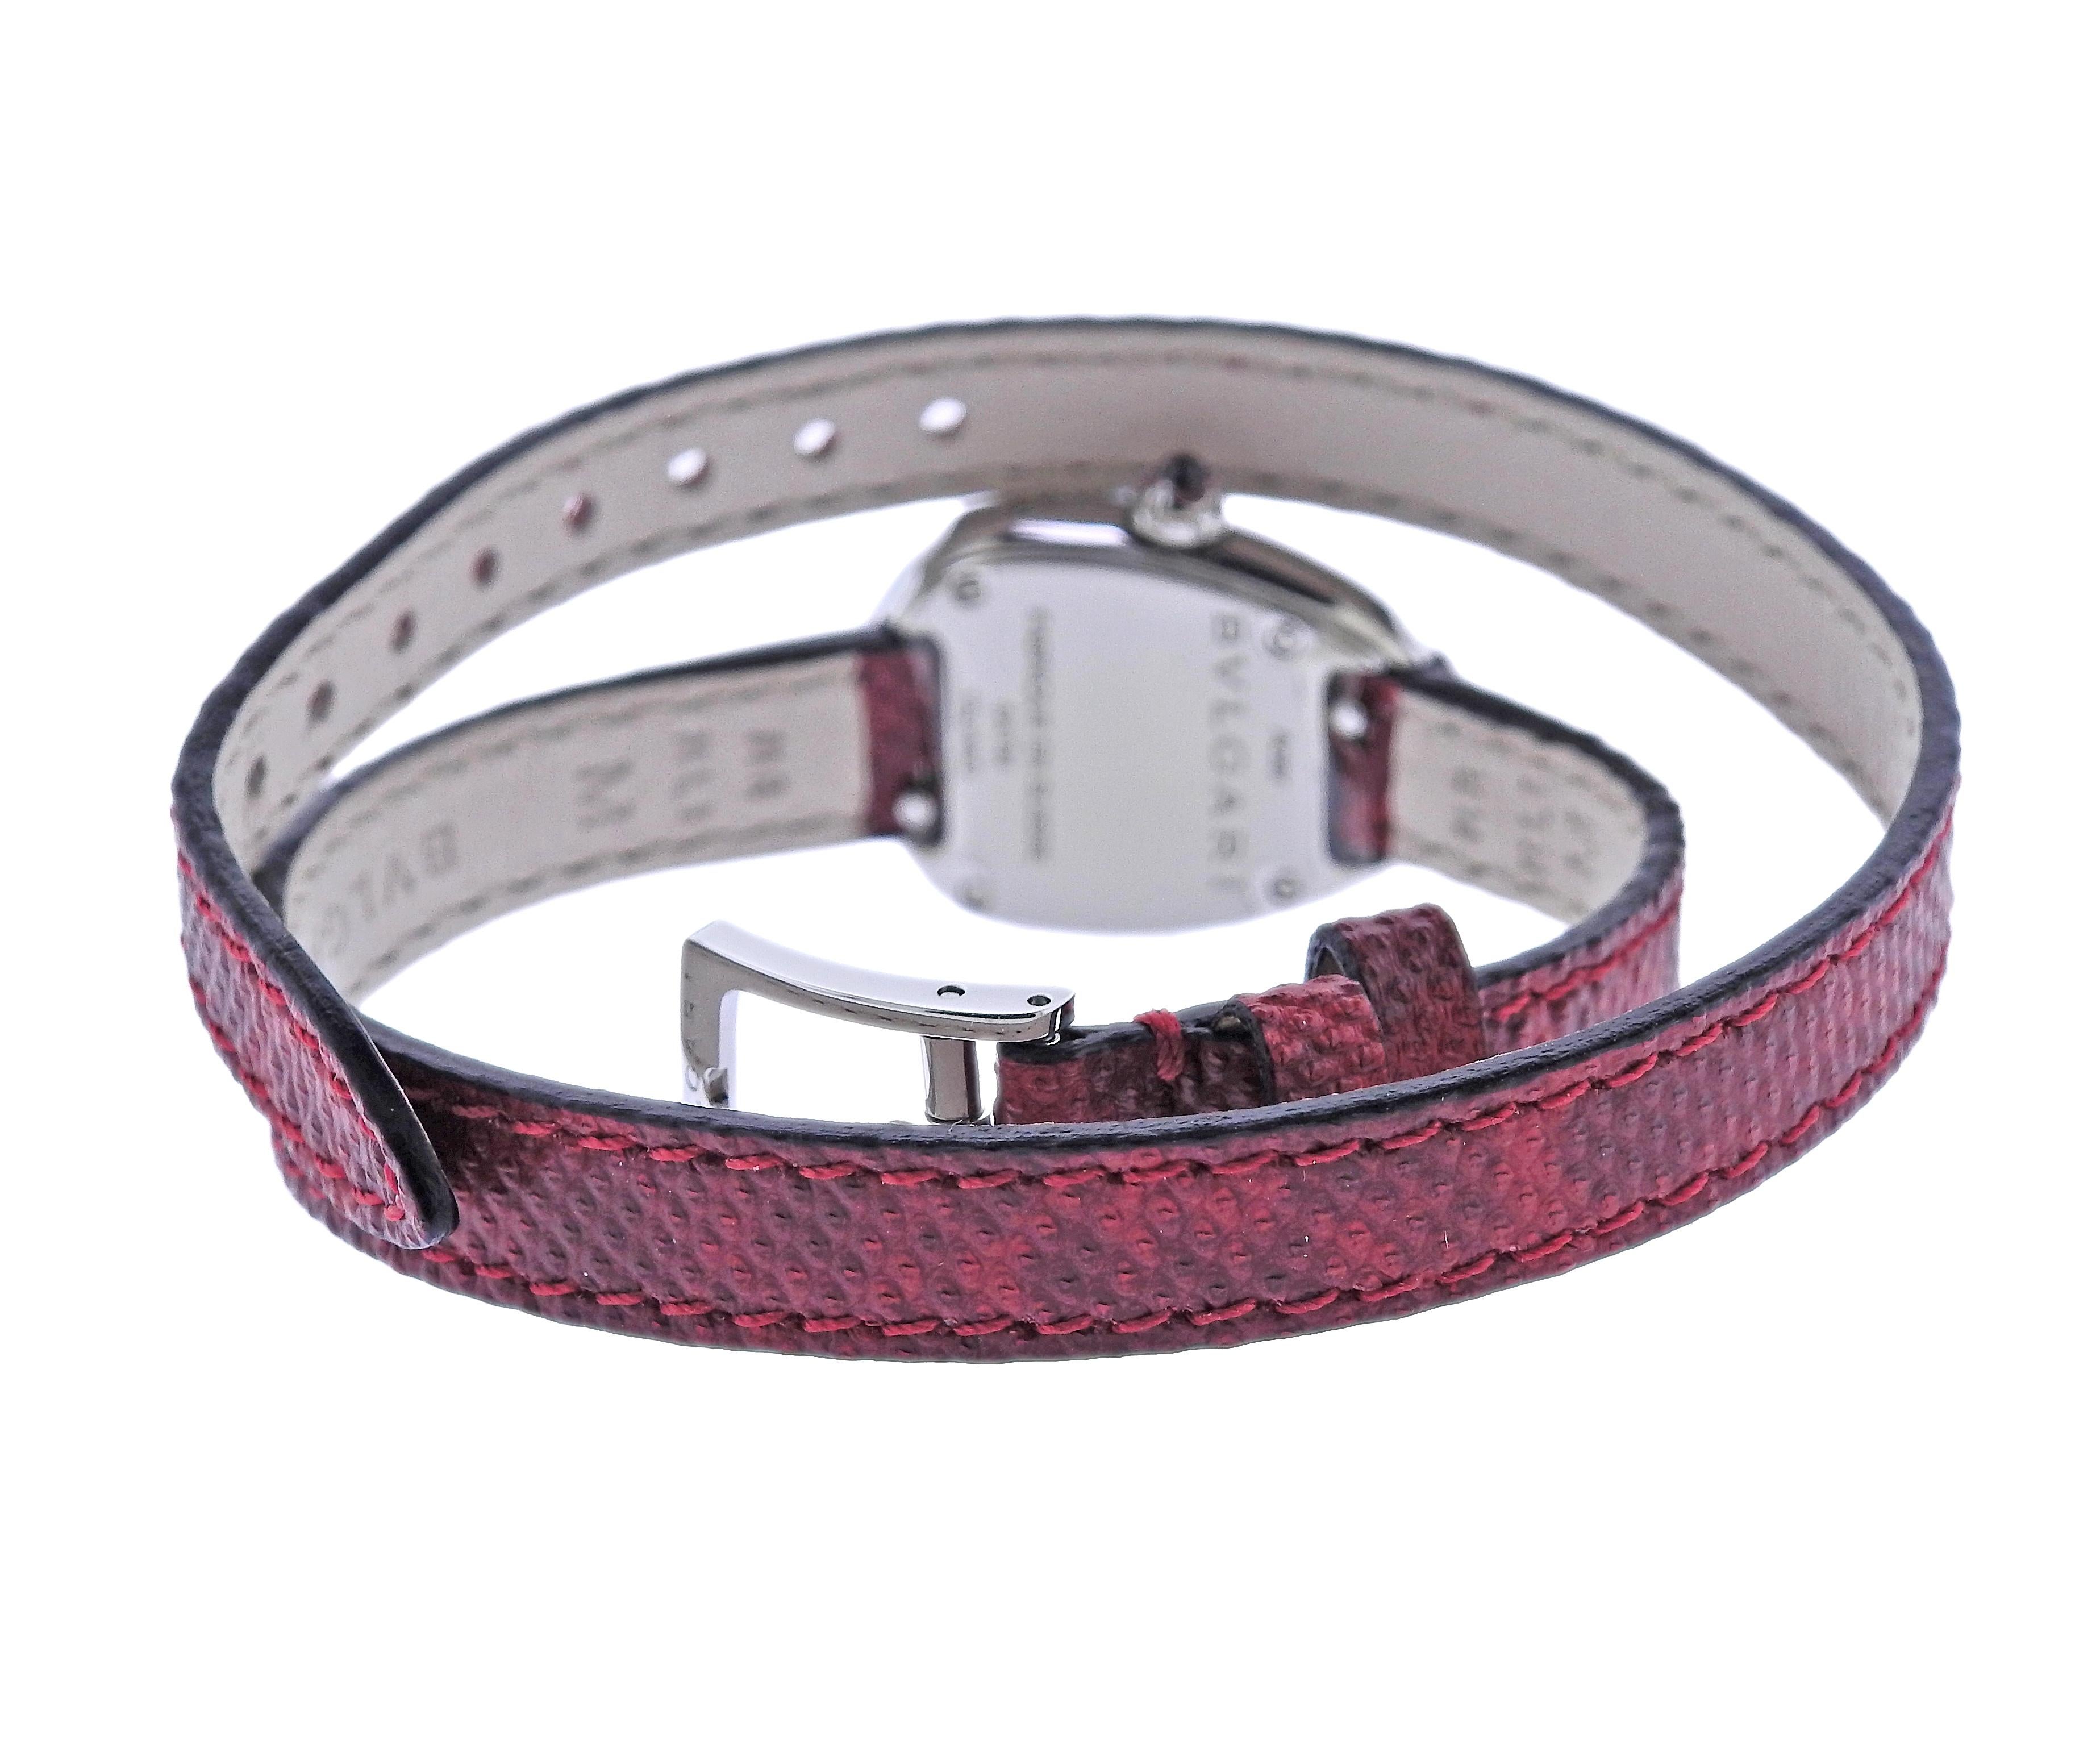 Bvlgari Serpenti stainless steeel and red Karung leather wrap bracelet watch, case decorated with diamonds, pink tourmaline crown and red dial. Retail $6450. Comes with box. and extra black wrap bracelet. Case is 20 x 27mm. Quartz movement.